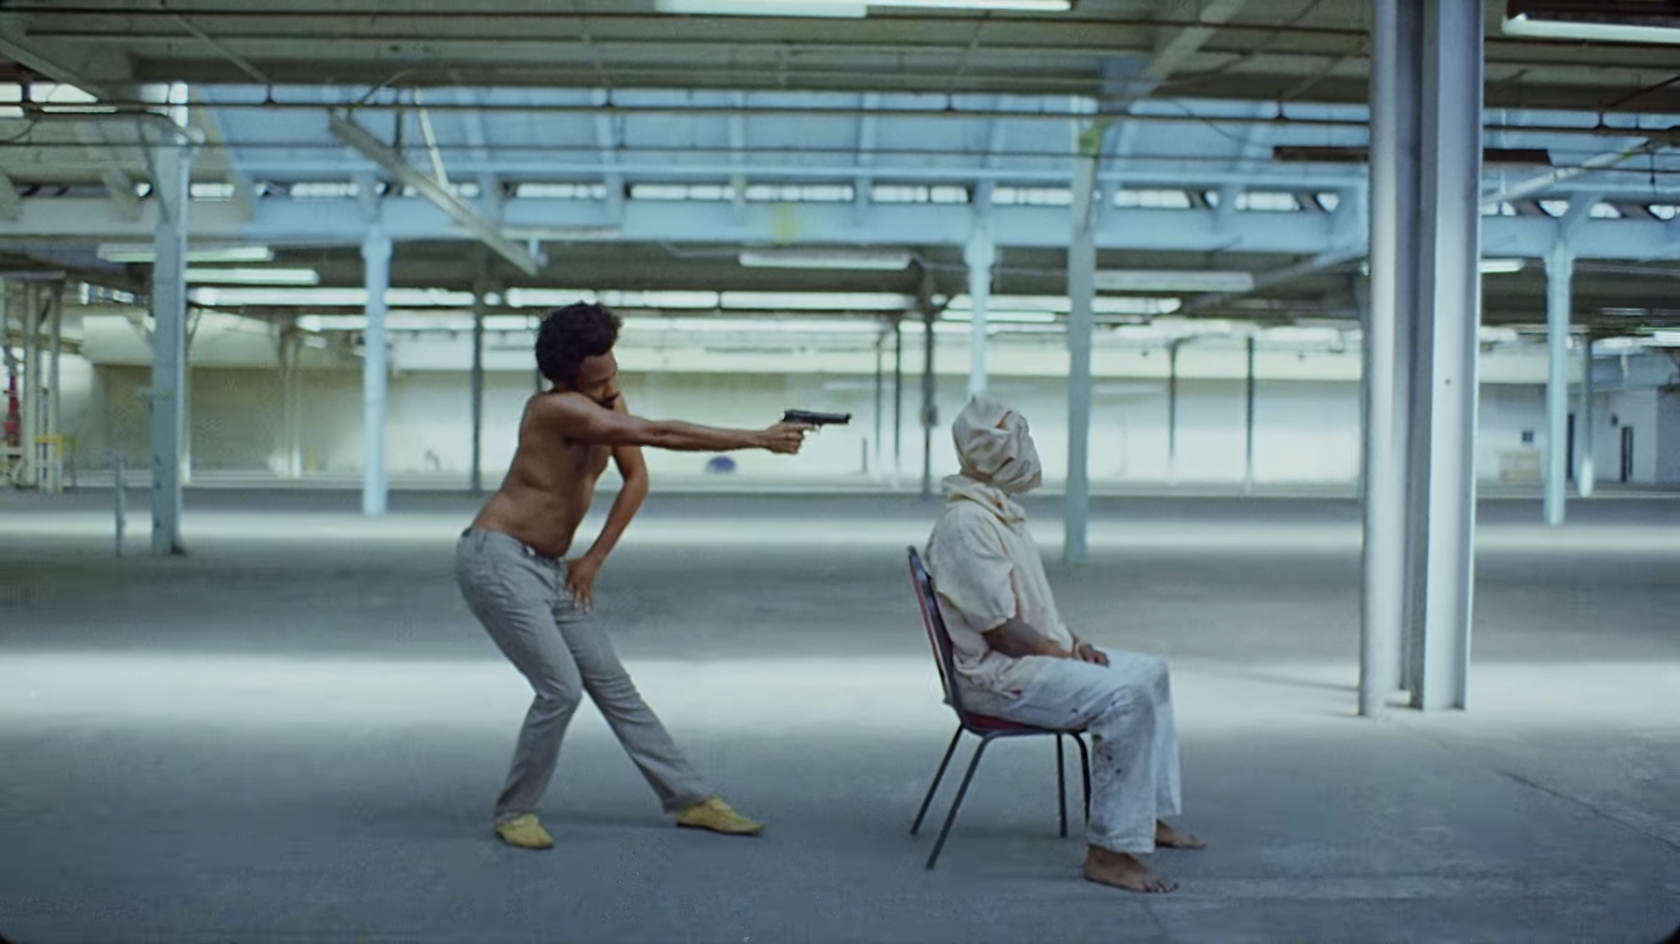 A still from the video "This Is America" showing Don Glover/Childish Gambino pointing the gun at a man sitting on a chair, wearing a hood over his head